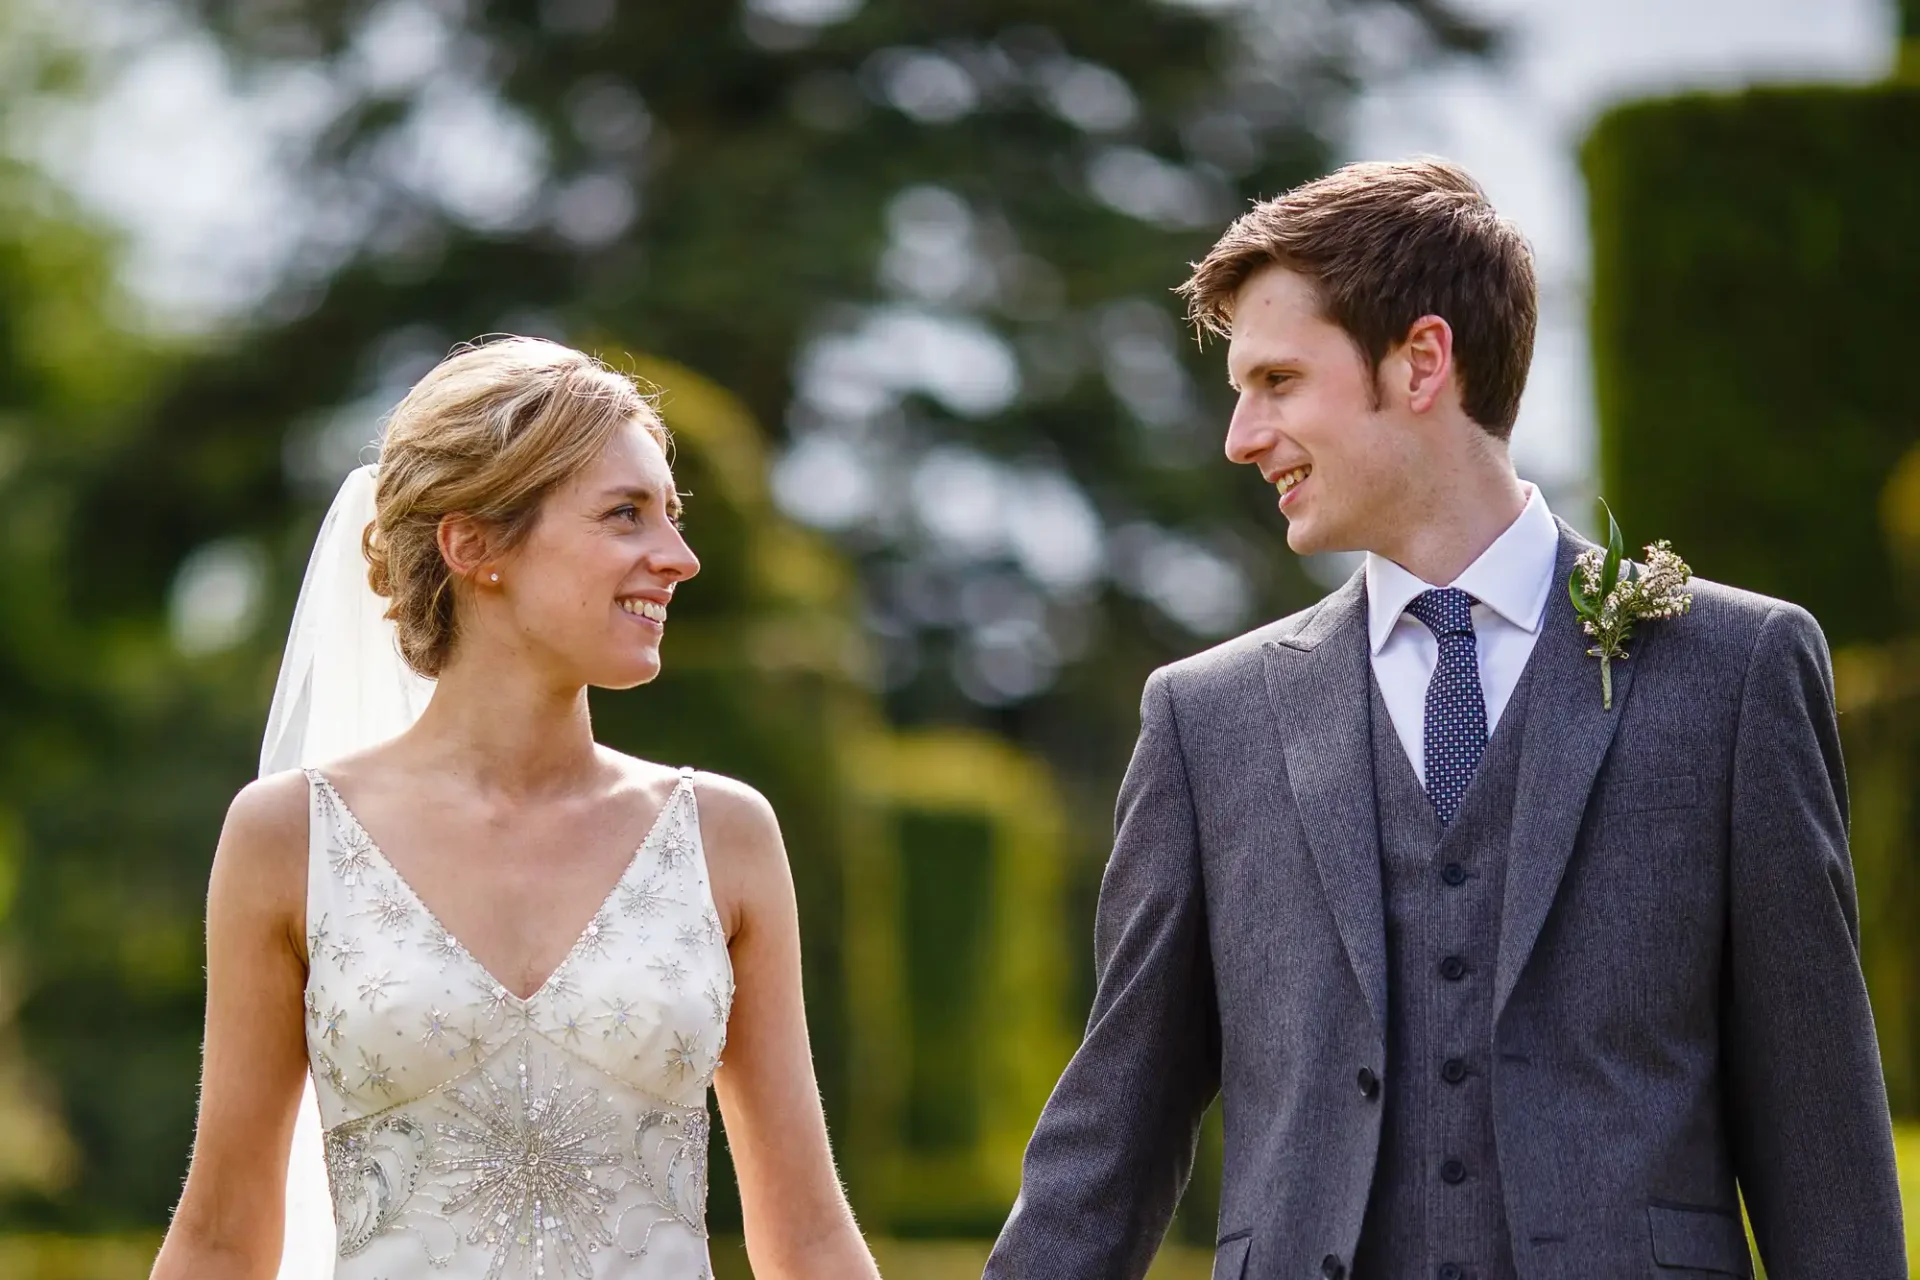 A bride and groom smiling at each other outdoors on a sunny day, both dressed in wedding attire.